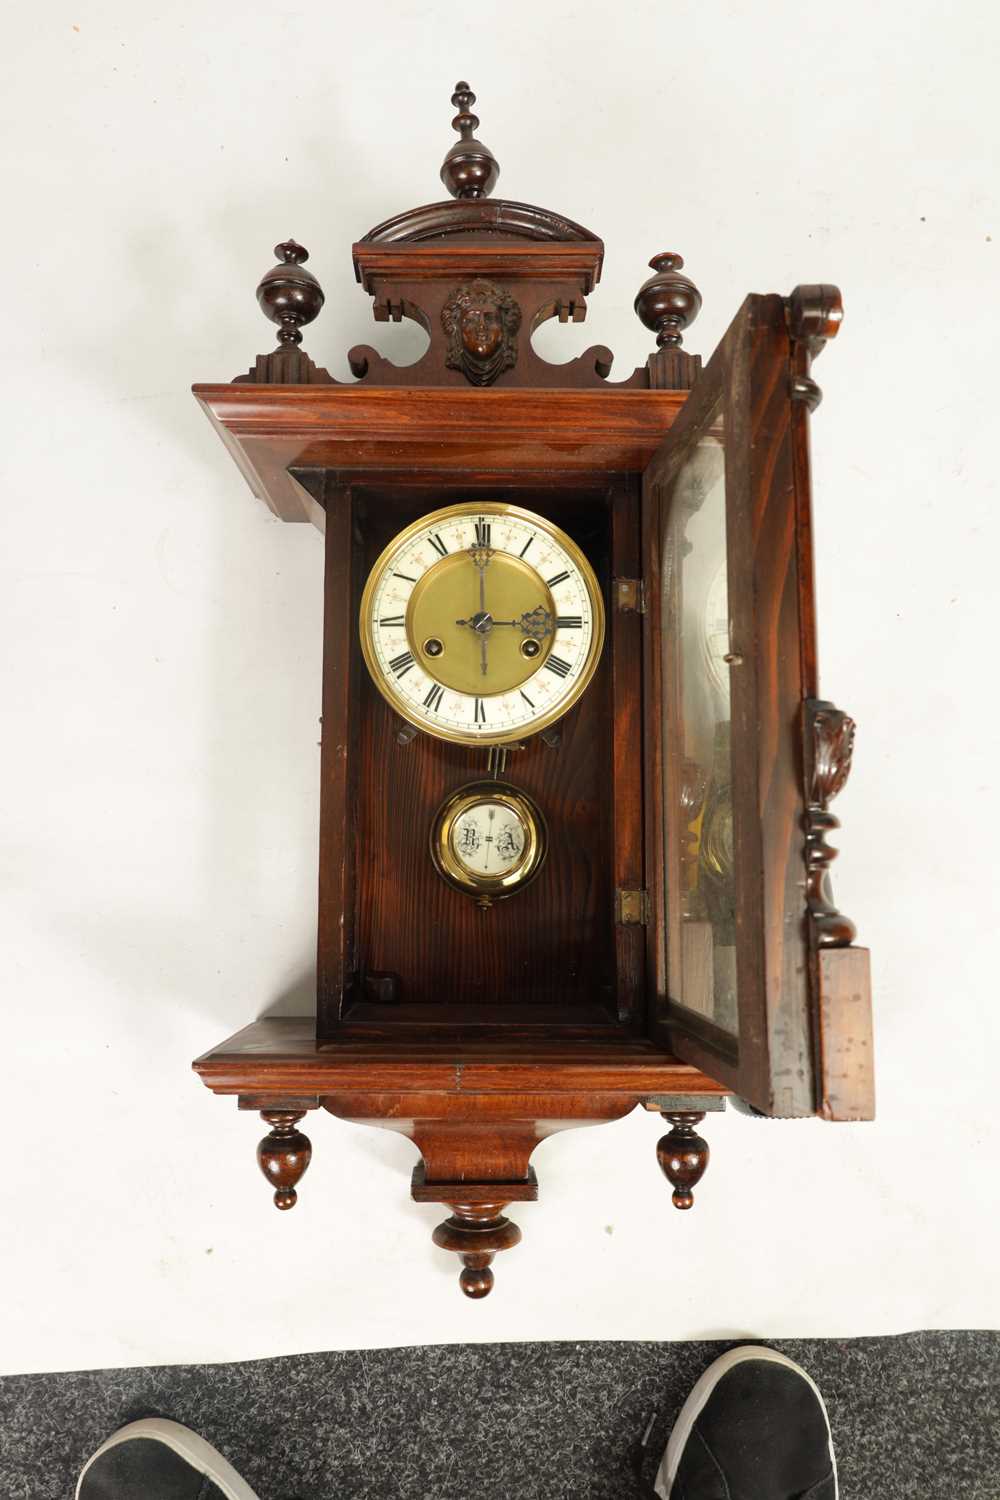 A SMALL 19TH CENTURY VIENNA STYLE WALL CLOCK - Image 7 of 11